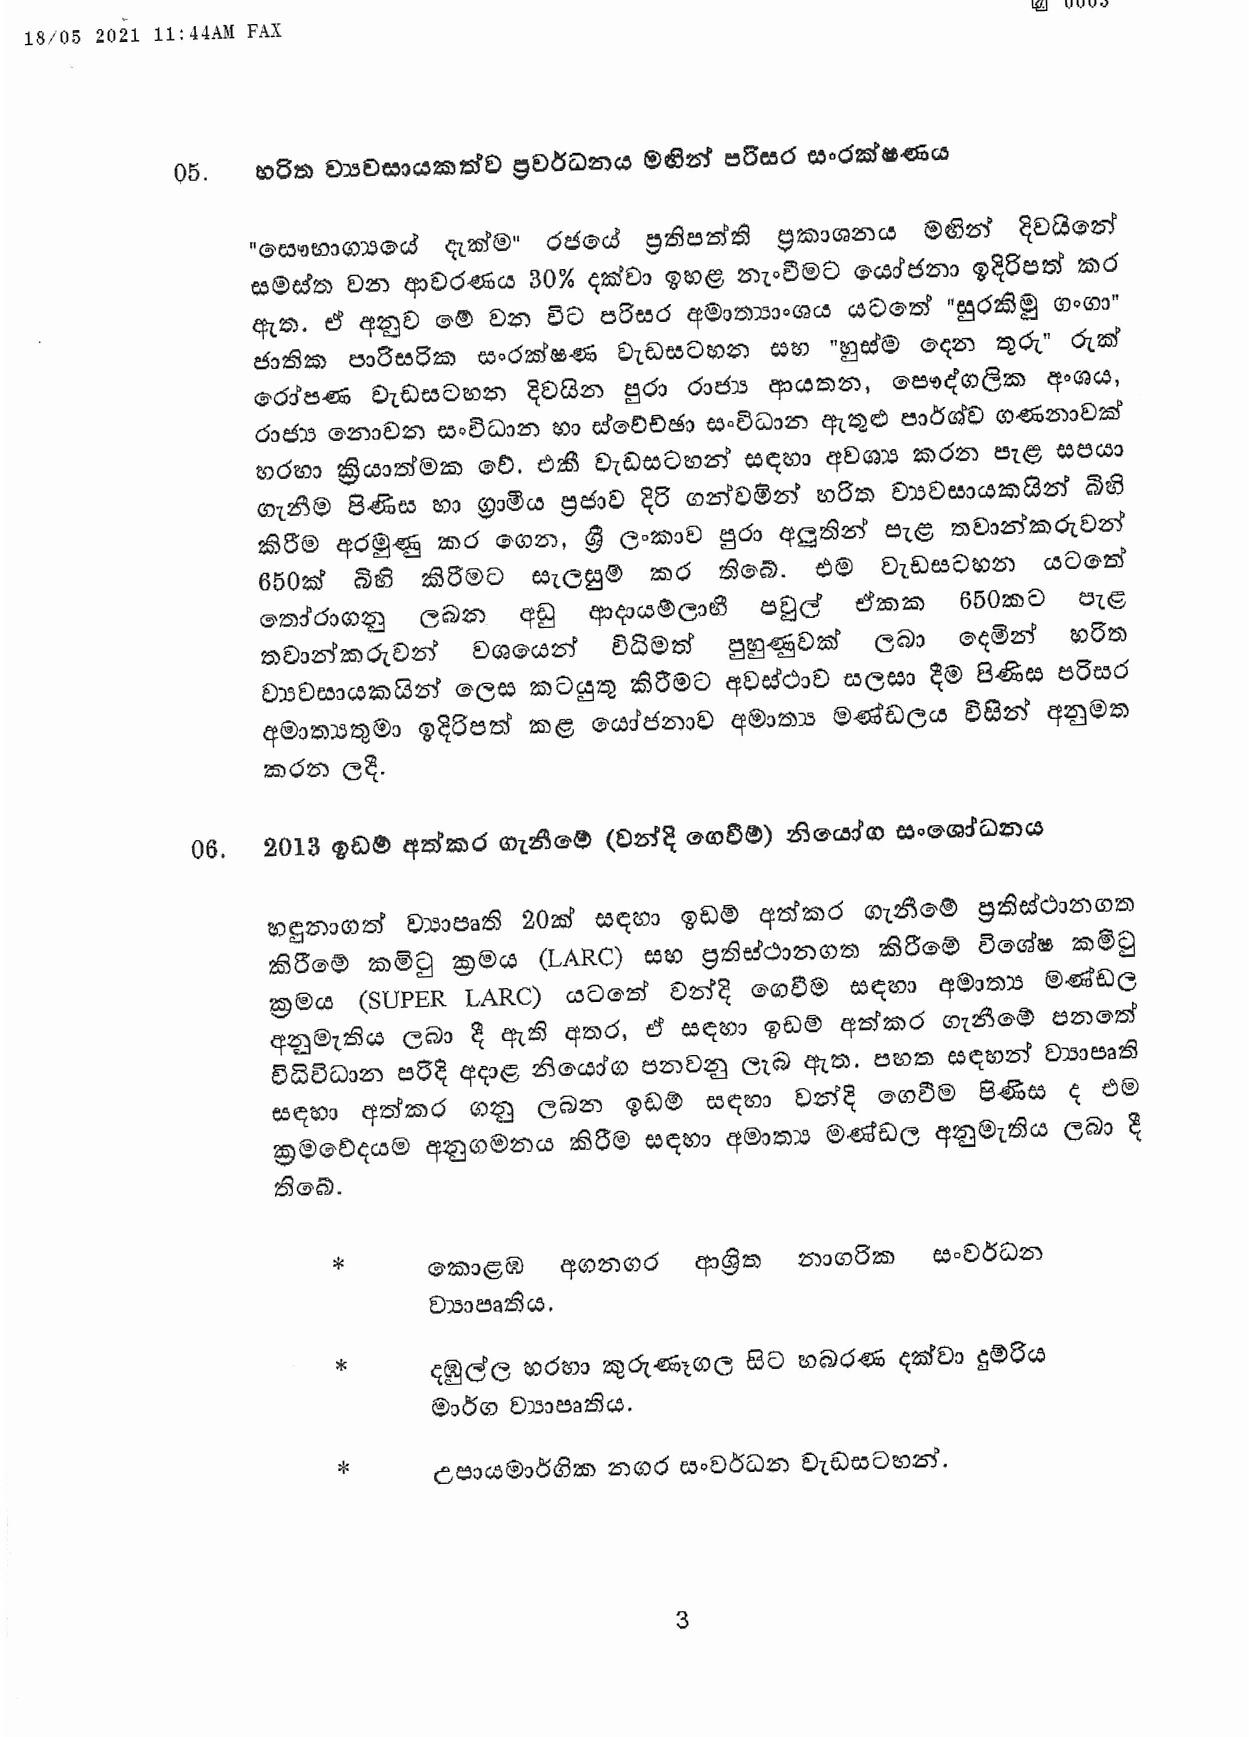 Cabinet Decision on 17.05.2021 page 003